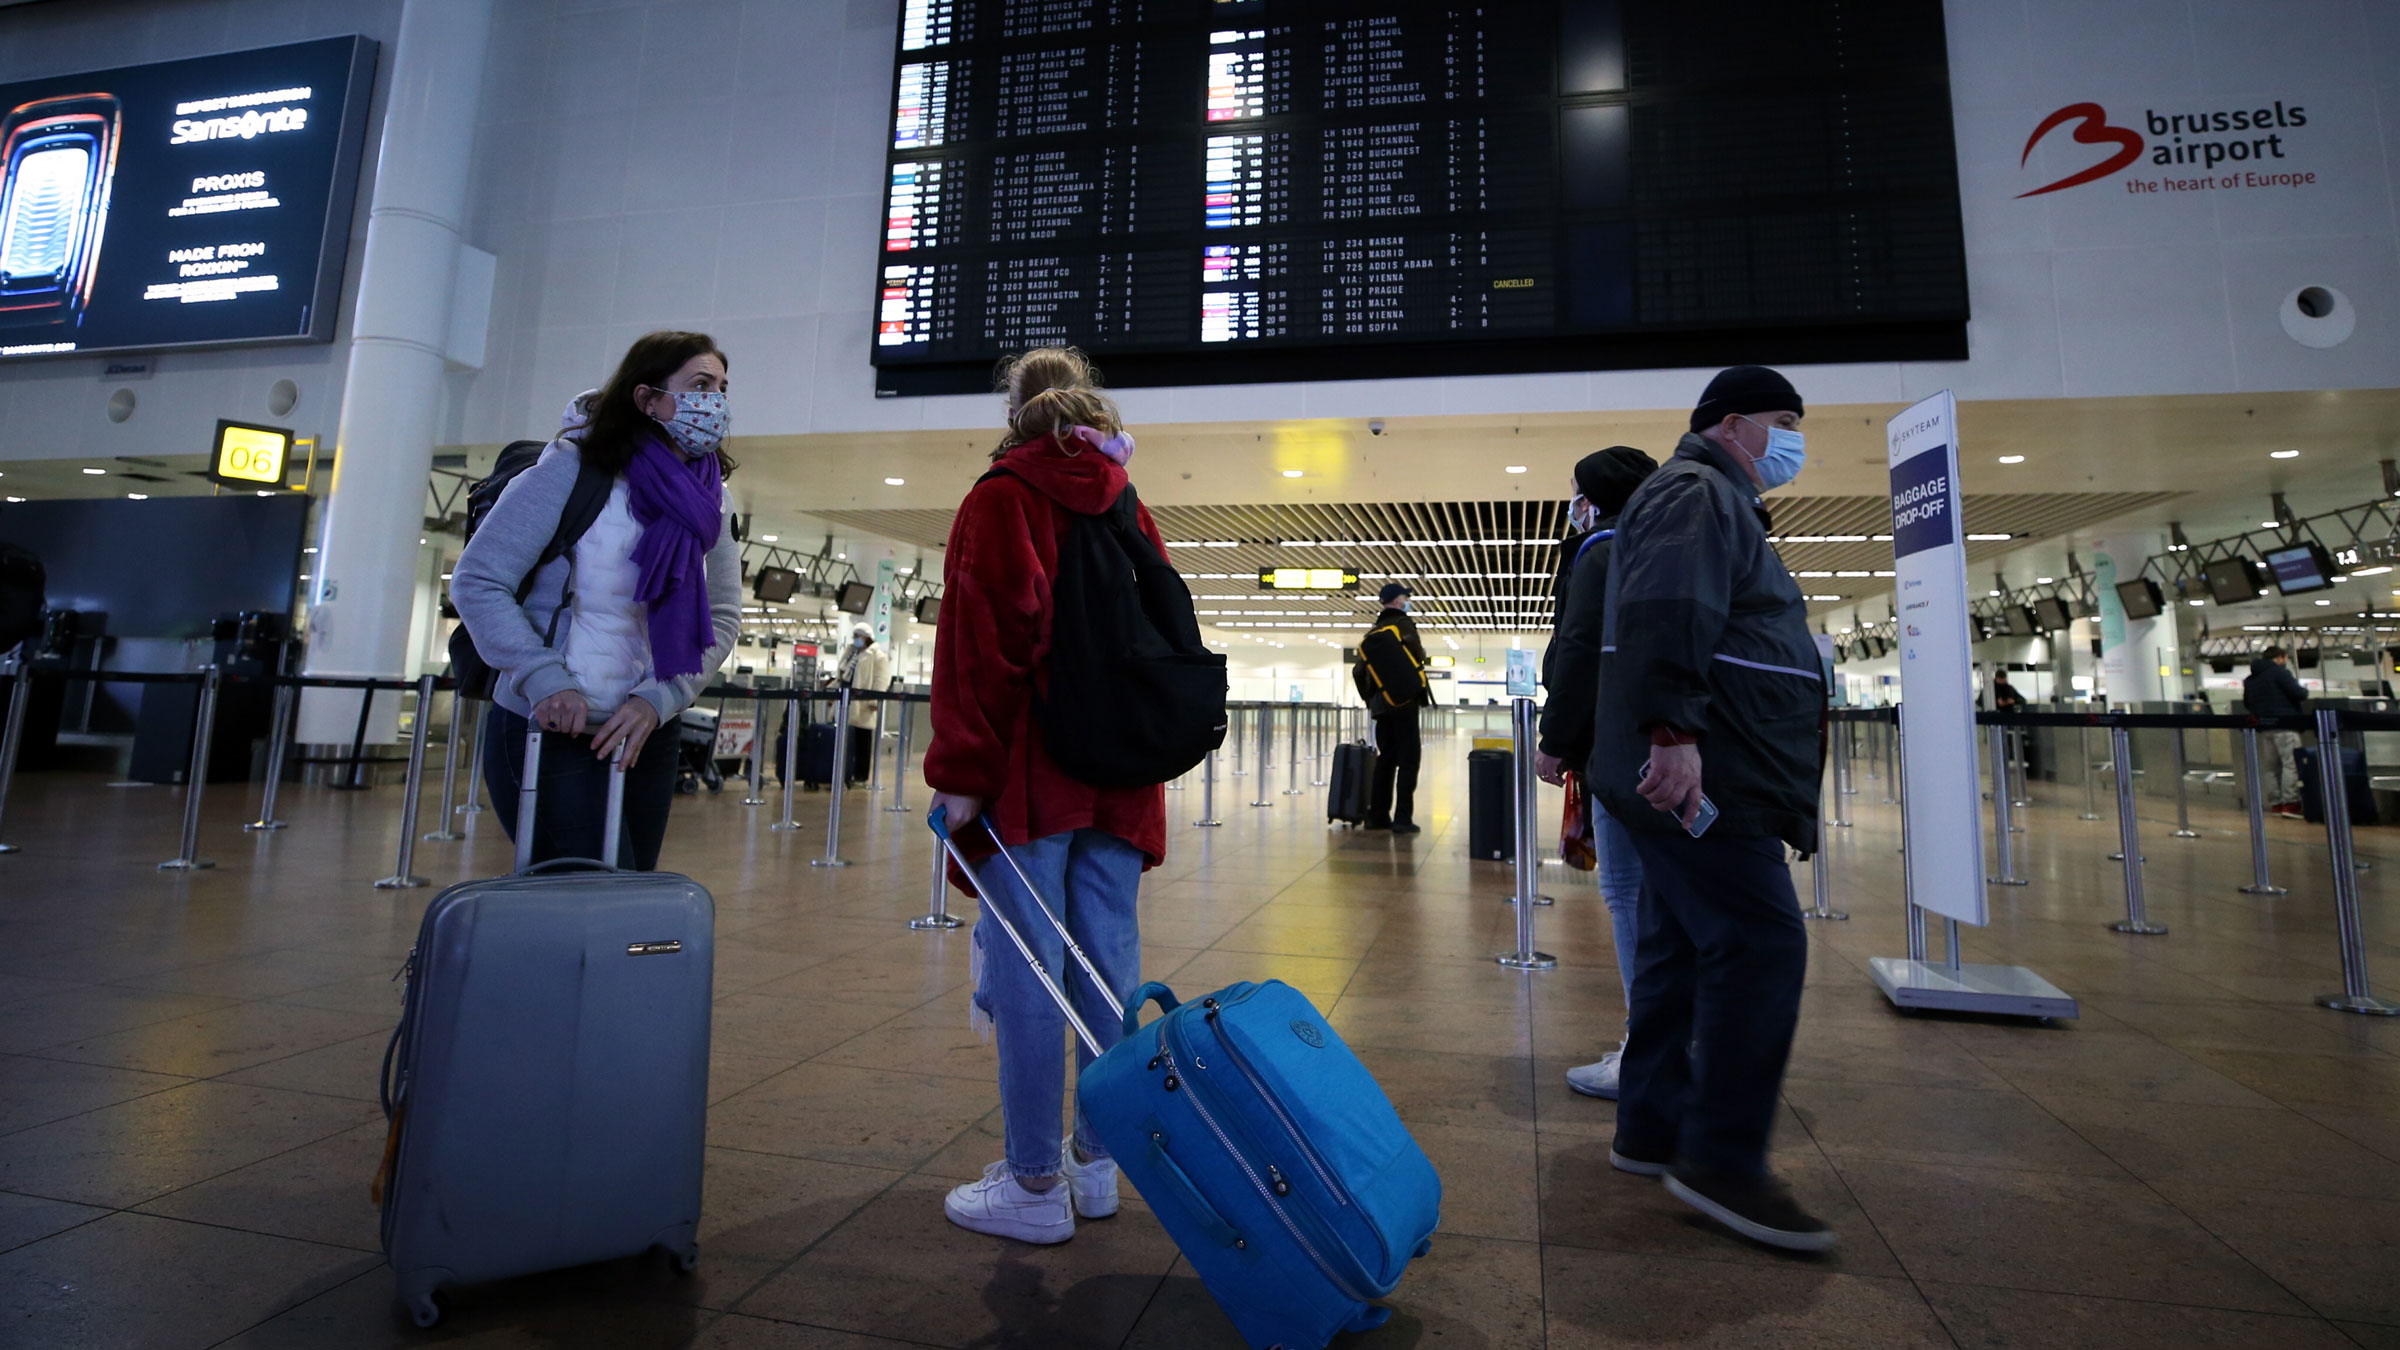 Travelers walk at Brussels Airport in Belgium after flights to the United Kingdom resumed on December 23.